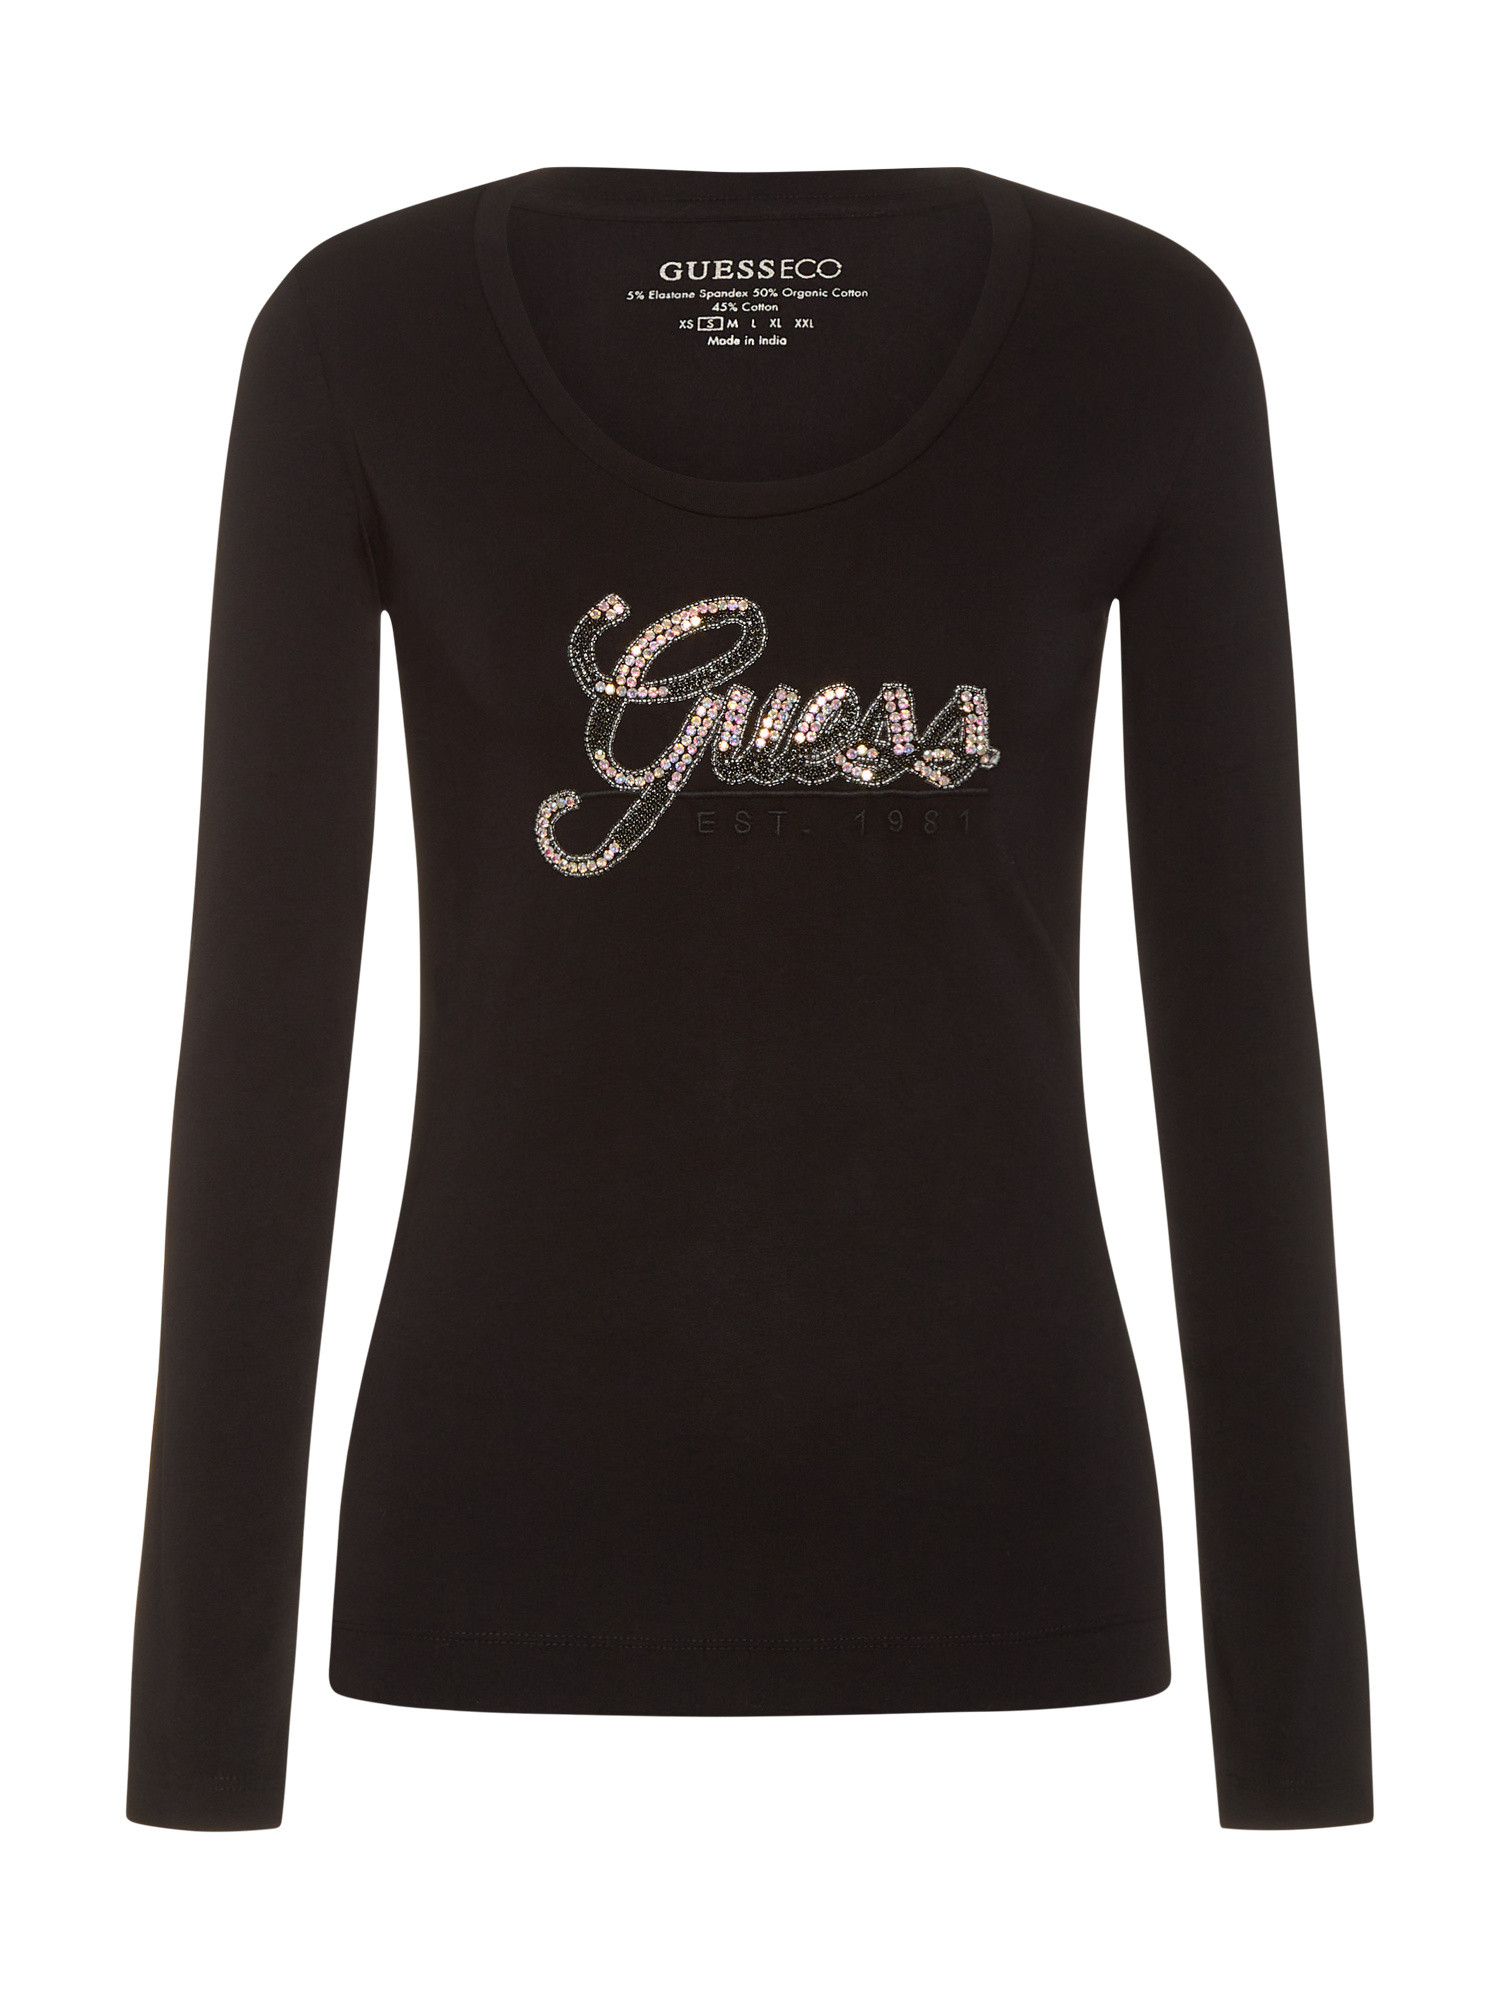 Guess - T-shirt con logo, Nero, large image number 0